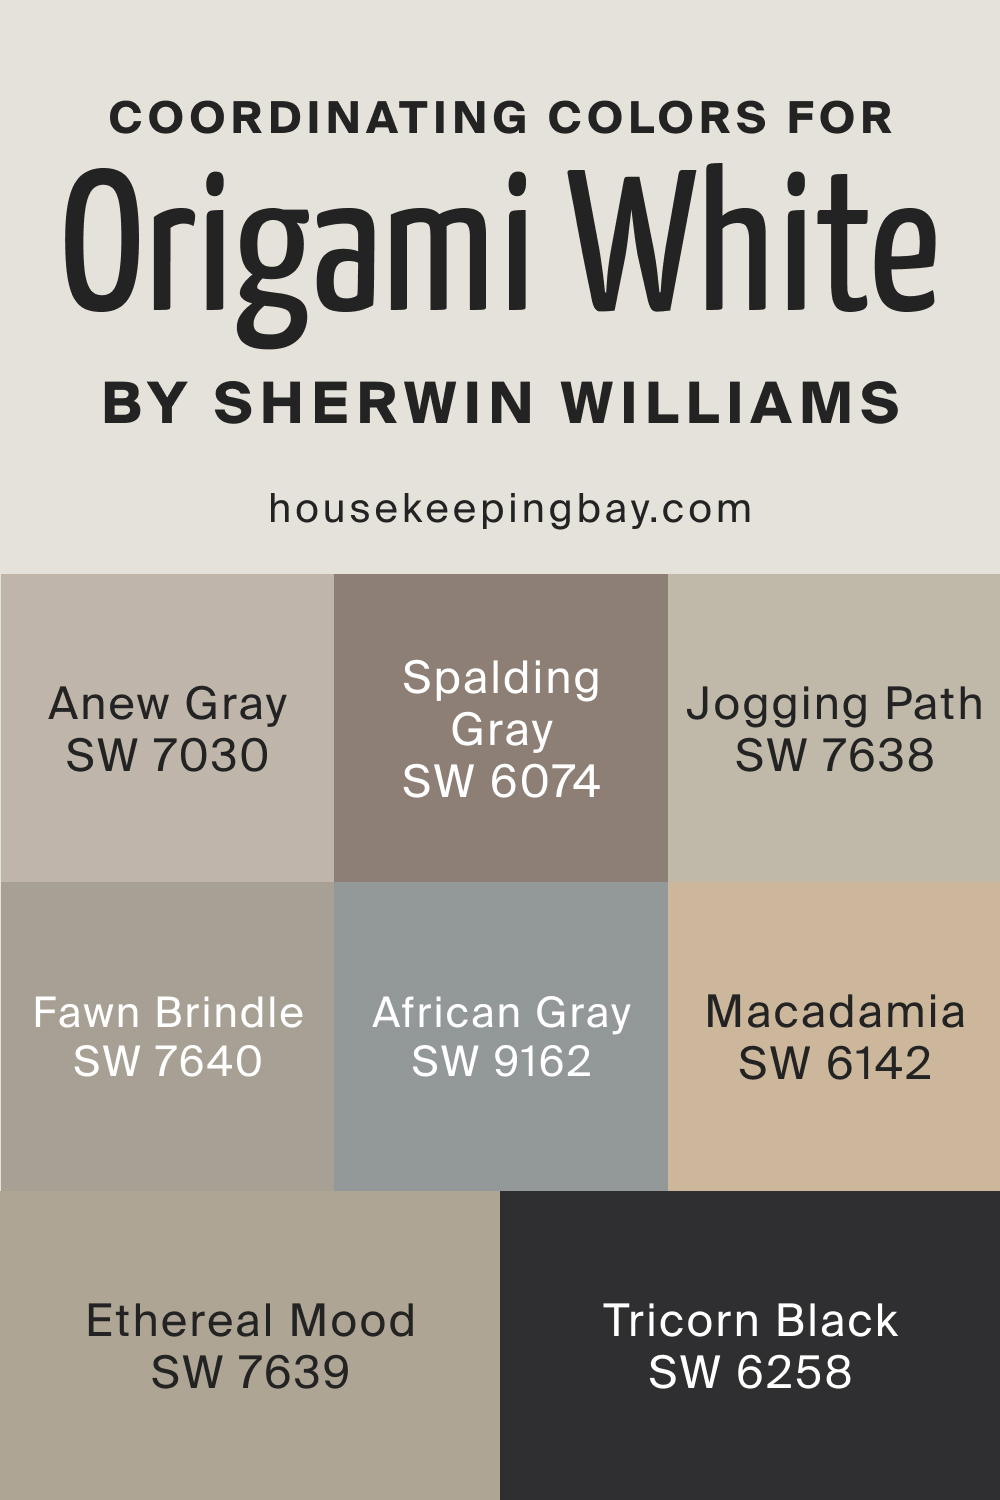 Coordinating Colors for Origami White SW 7636 by Sherwin Williams